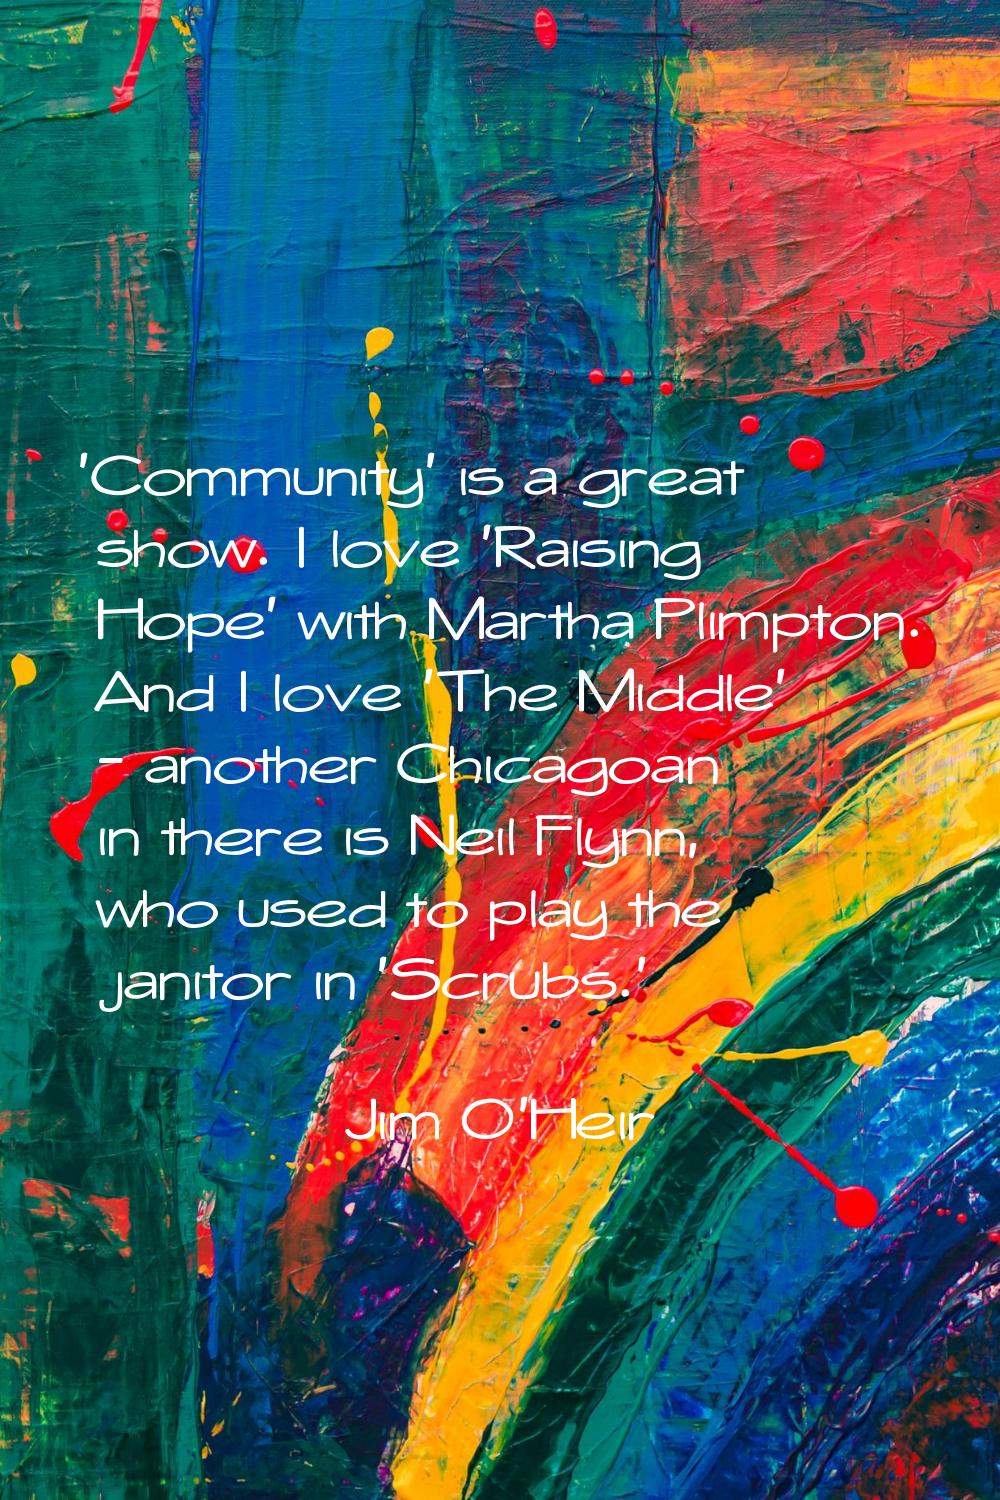 'Community' is a great show. I love 'Raising Hope' with Martha Plimpton. And I love 'The Middle' - 